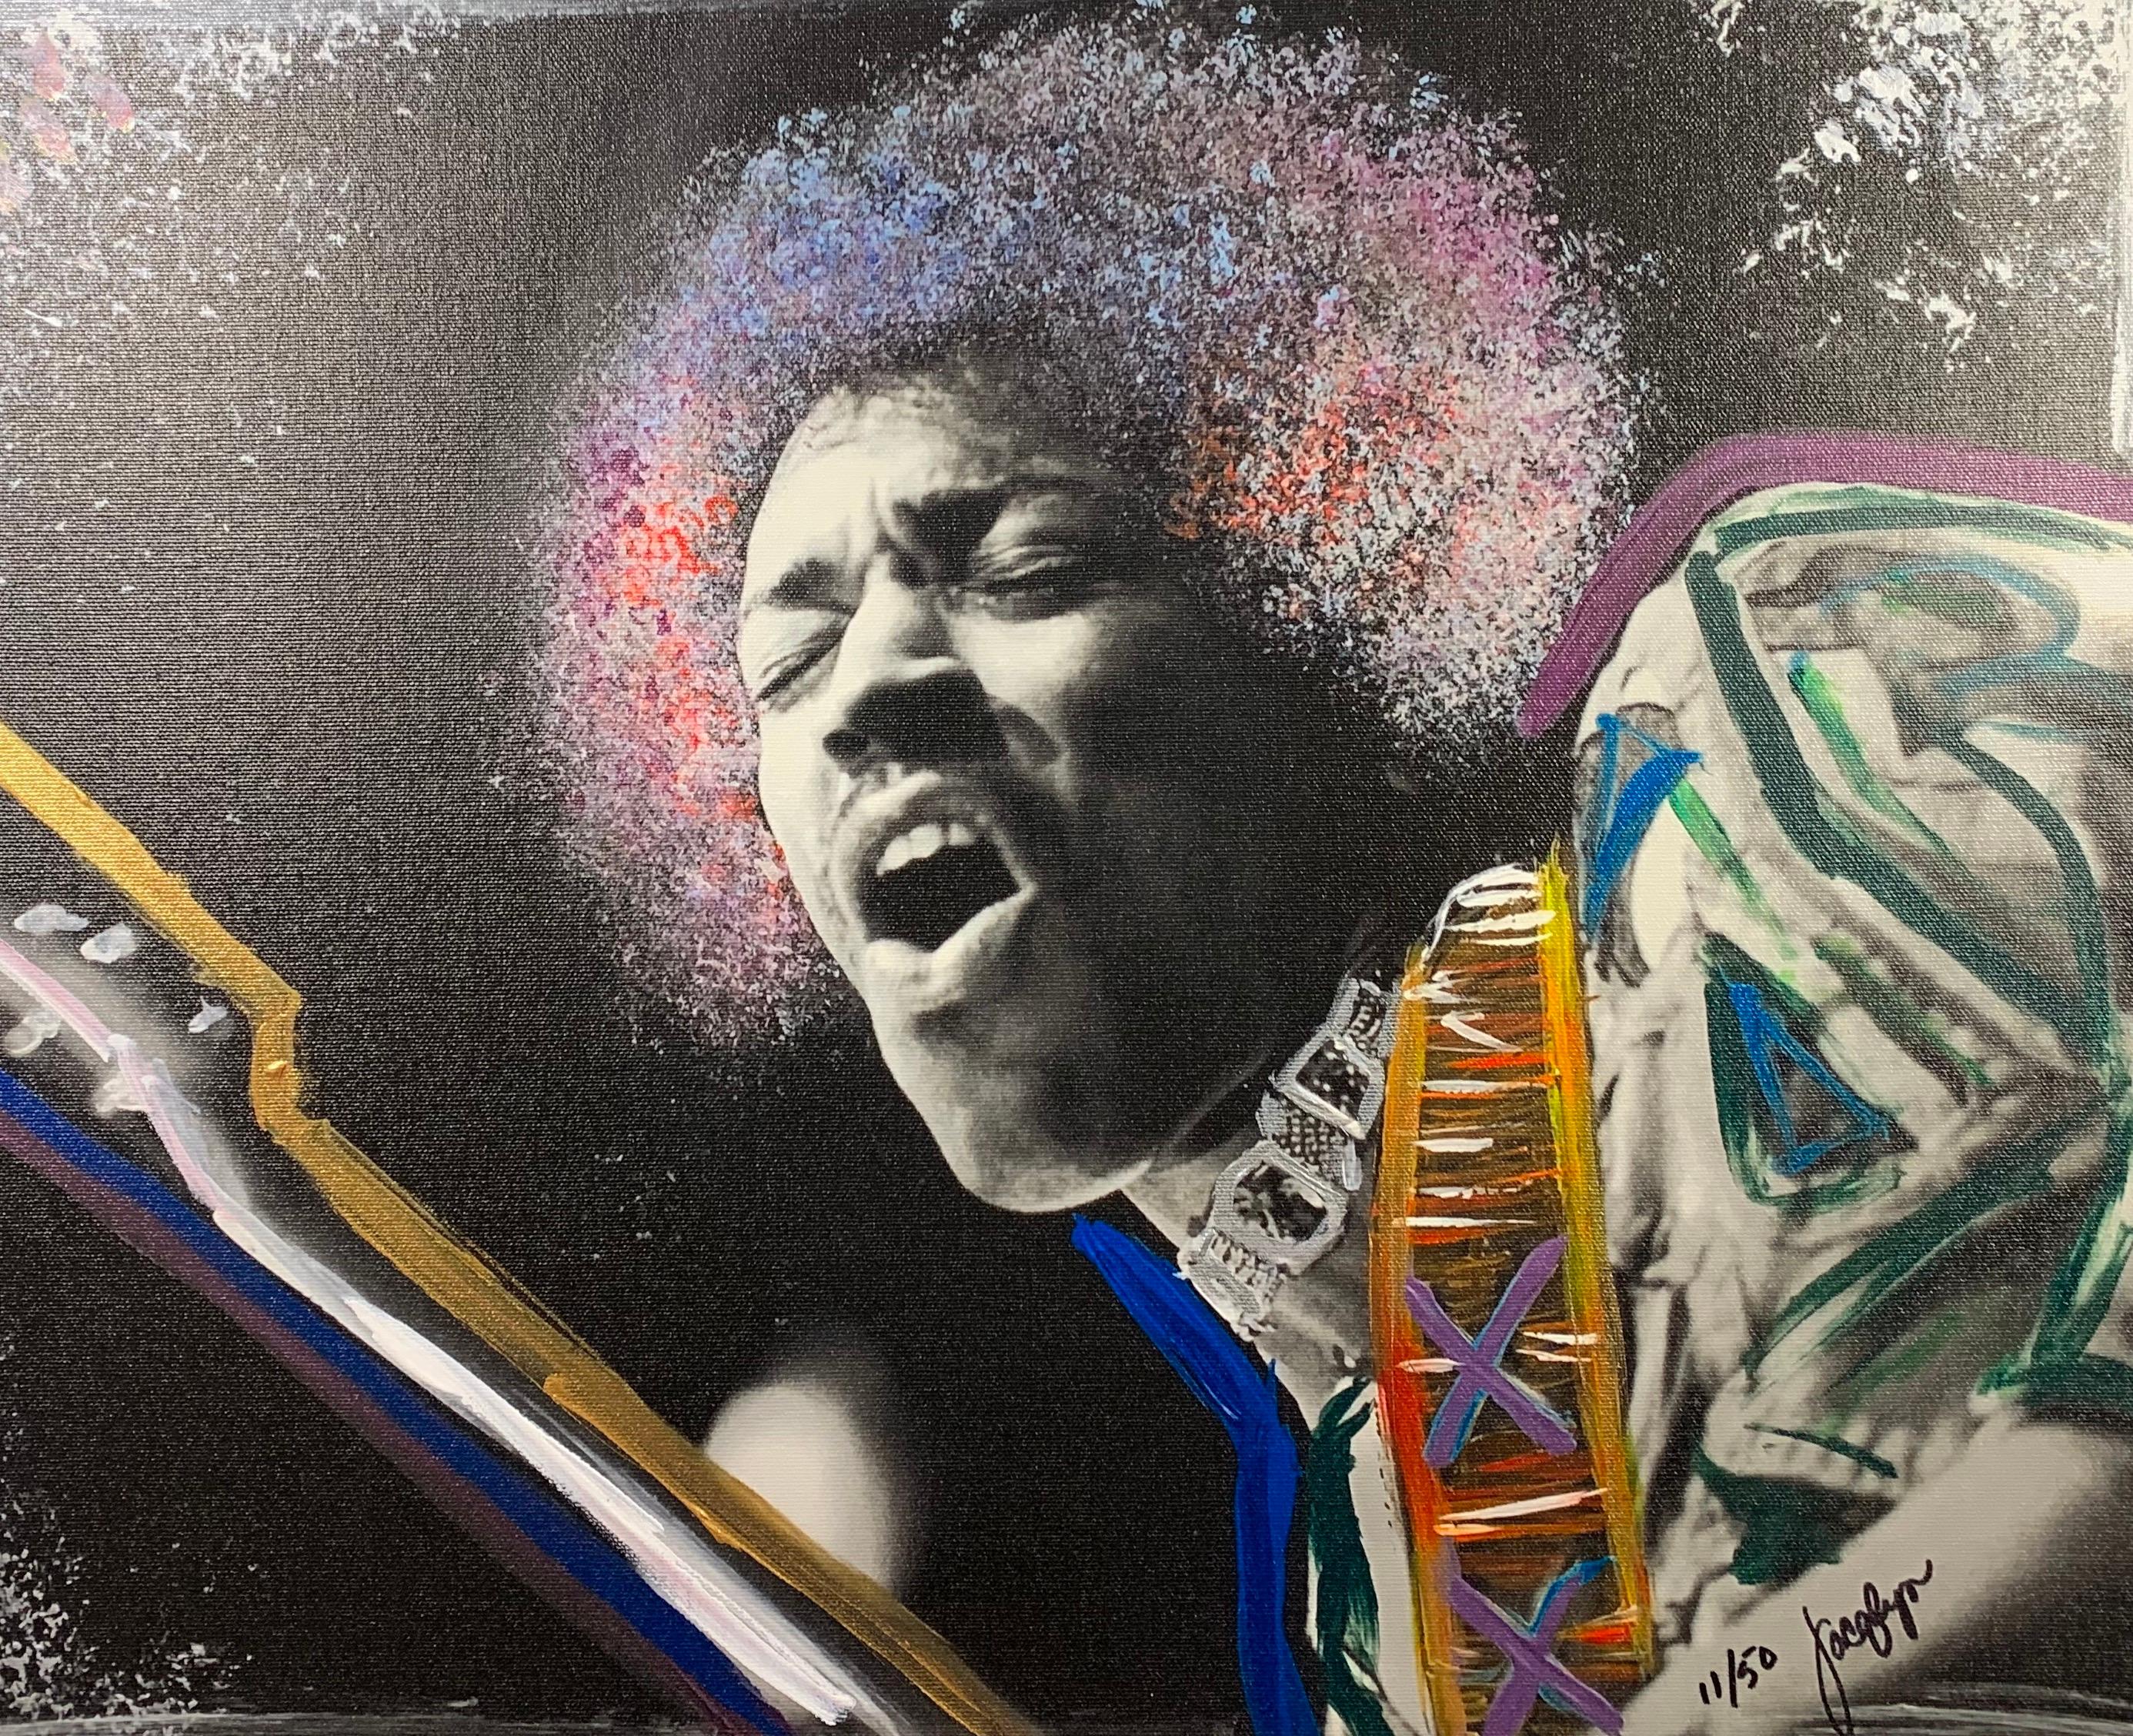 "Jammin" featuring Jimi Hendrix is an original hand embellished limited edition fine art print on satin canvas by Los Angeles based artist Jacqlyn Burnett.  The print measures approximately 17"x22" and is signed on the front and back and numbered